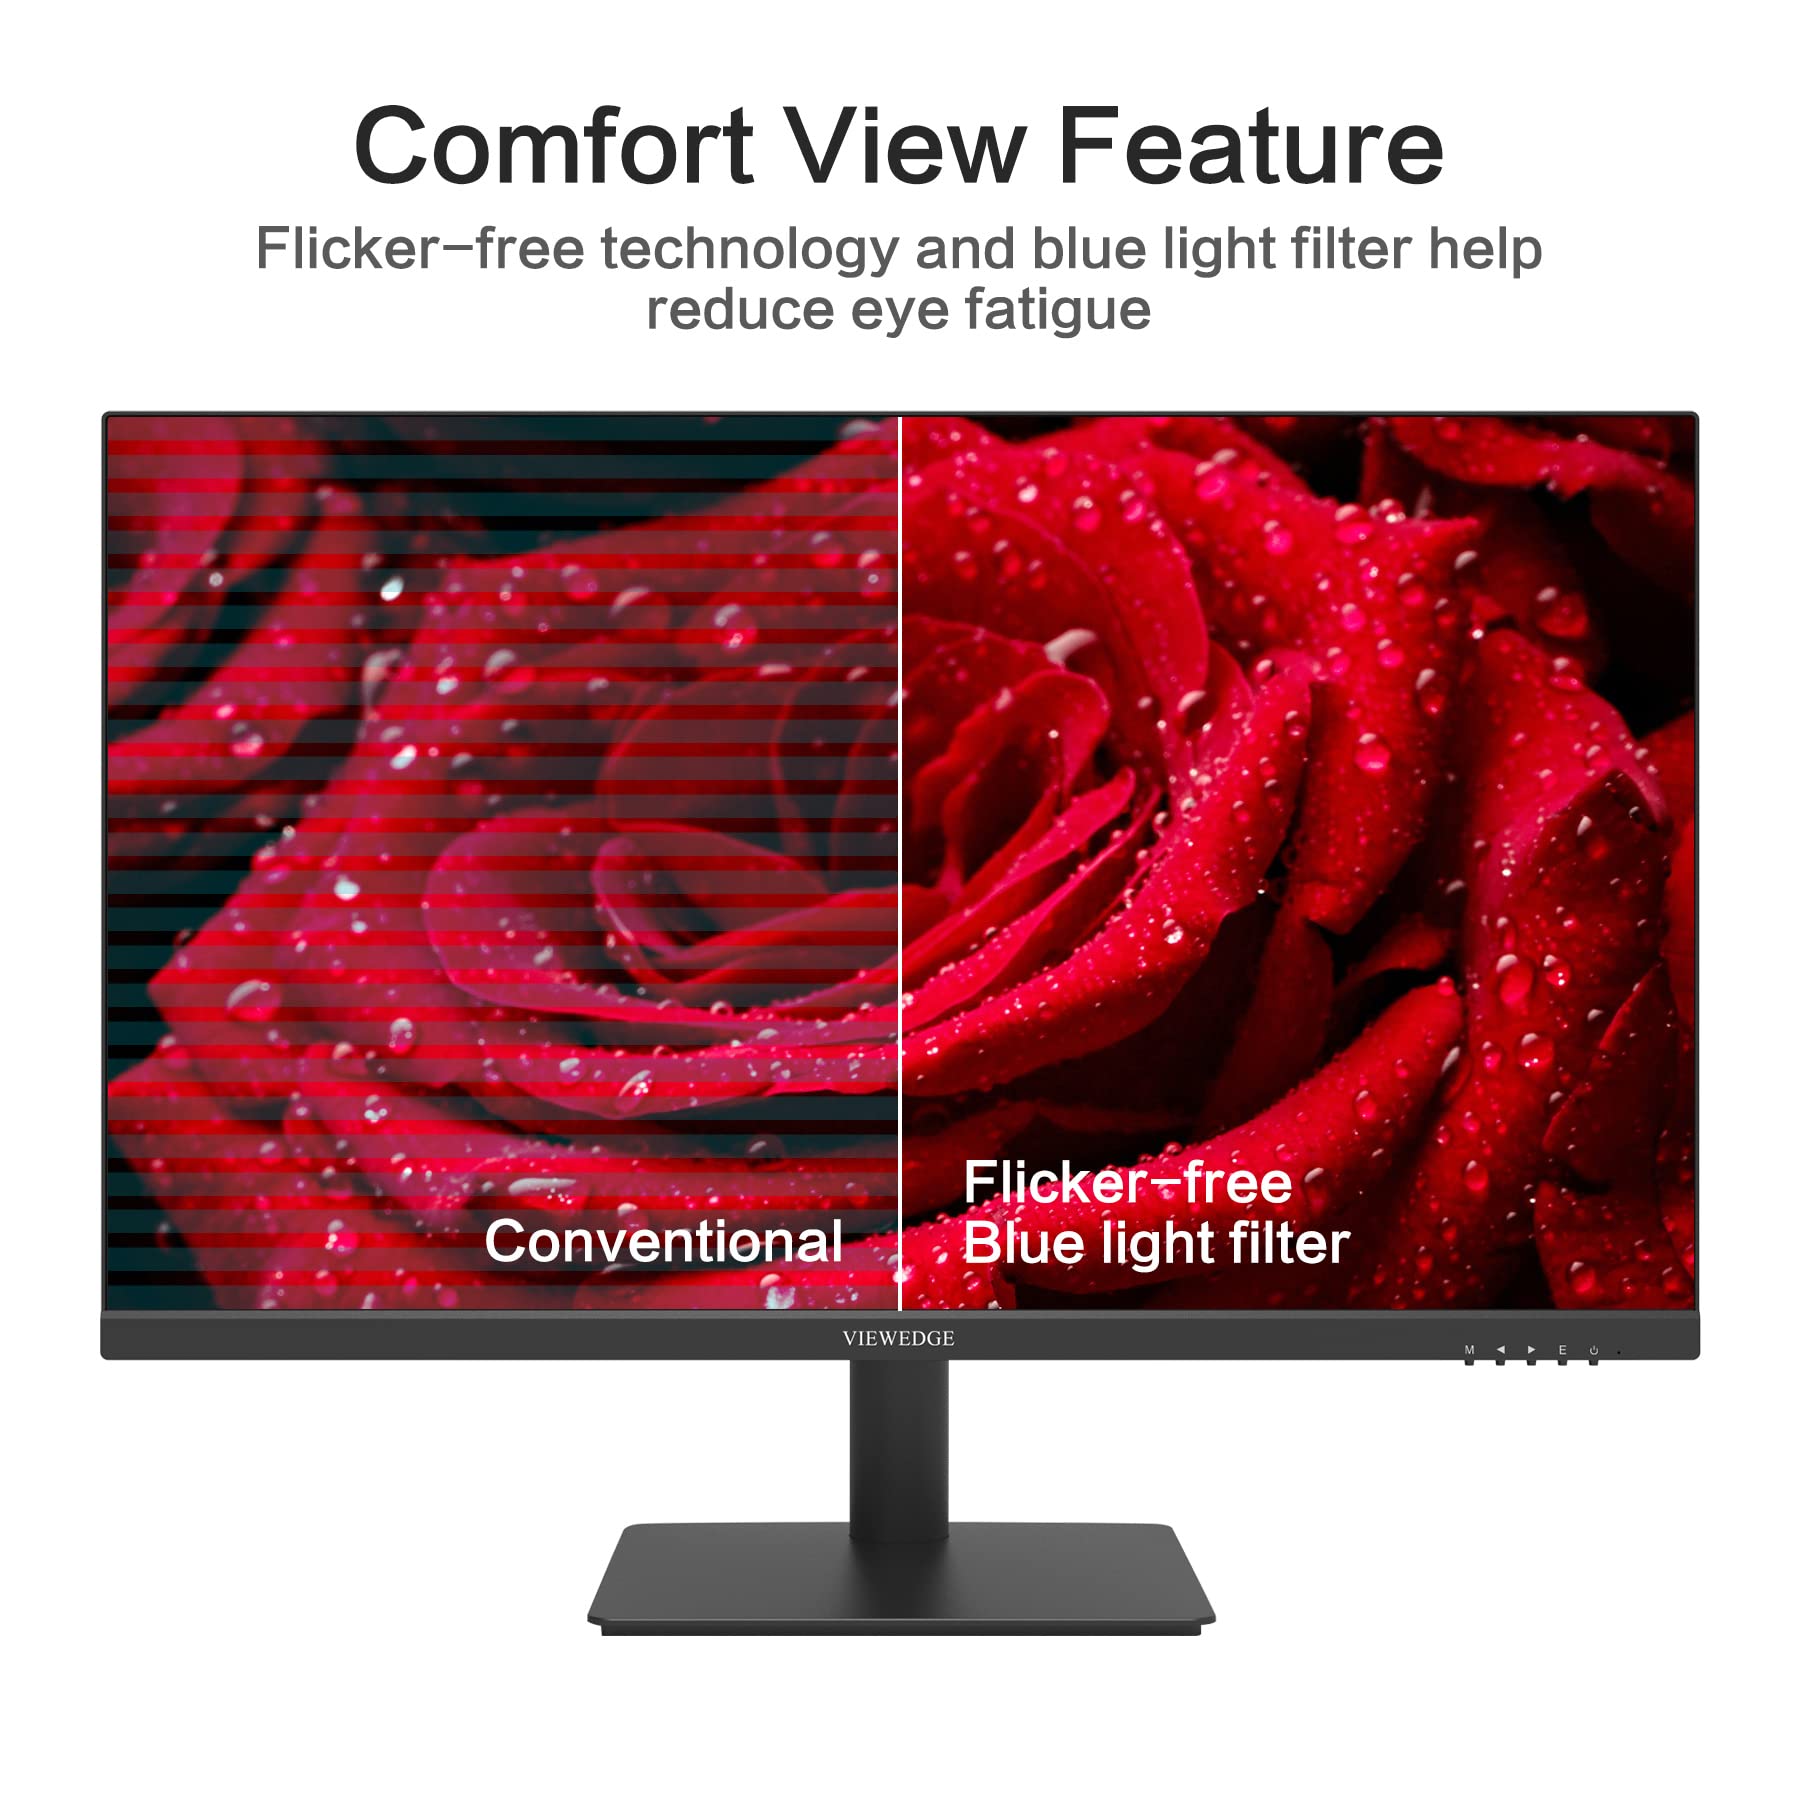 Viewedge 24 Inch Monitor - Computer Monitor Featured with 1080p 75 Hz - Ultra Thin Bezel Designed - Eye Protection (Blue Light Filter & Flicker Free) HDMI Office & Game Monitor